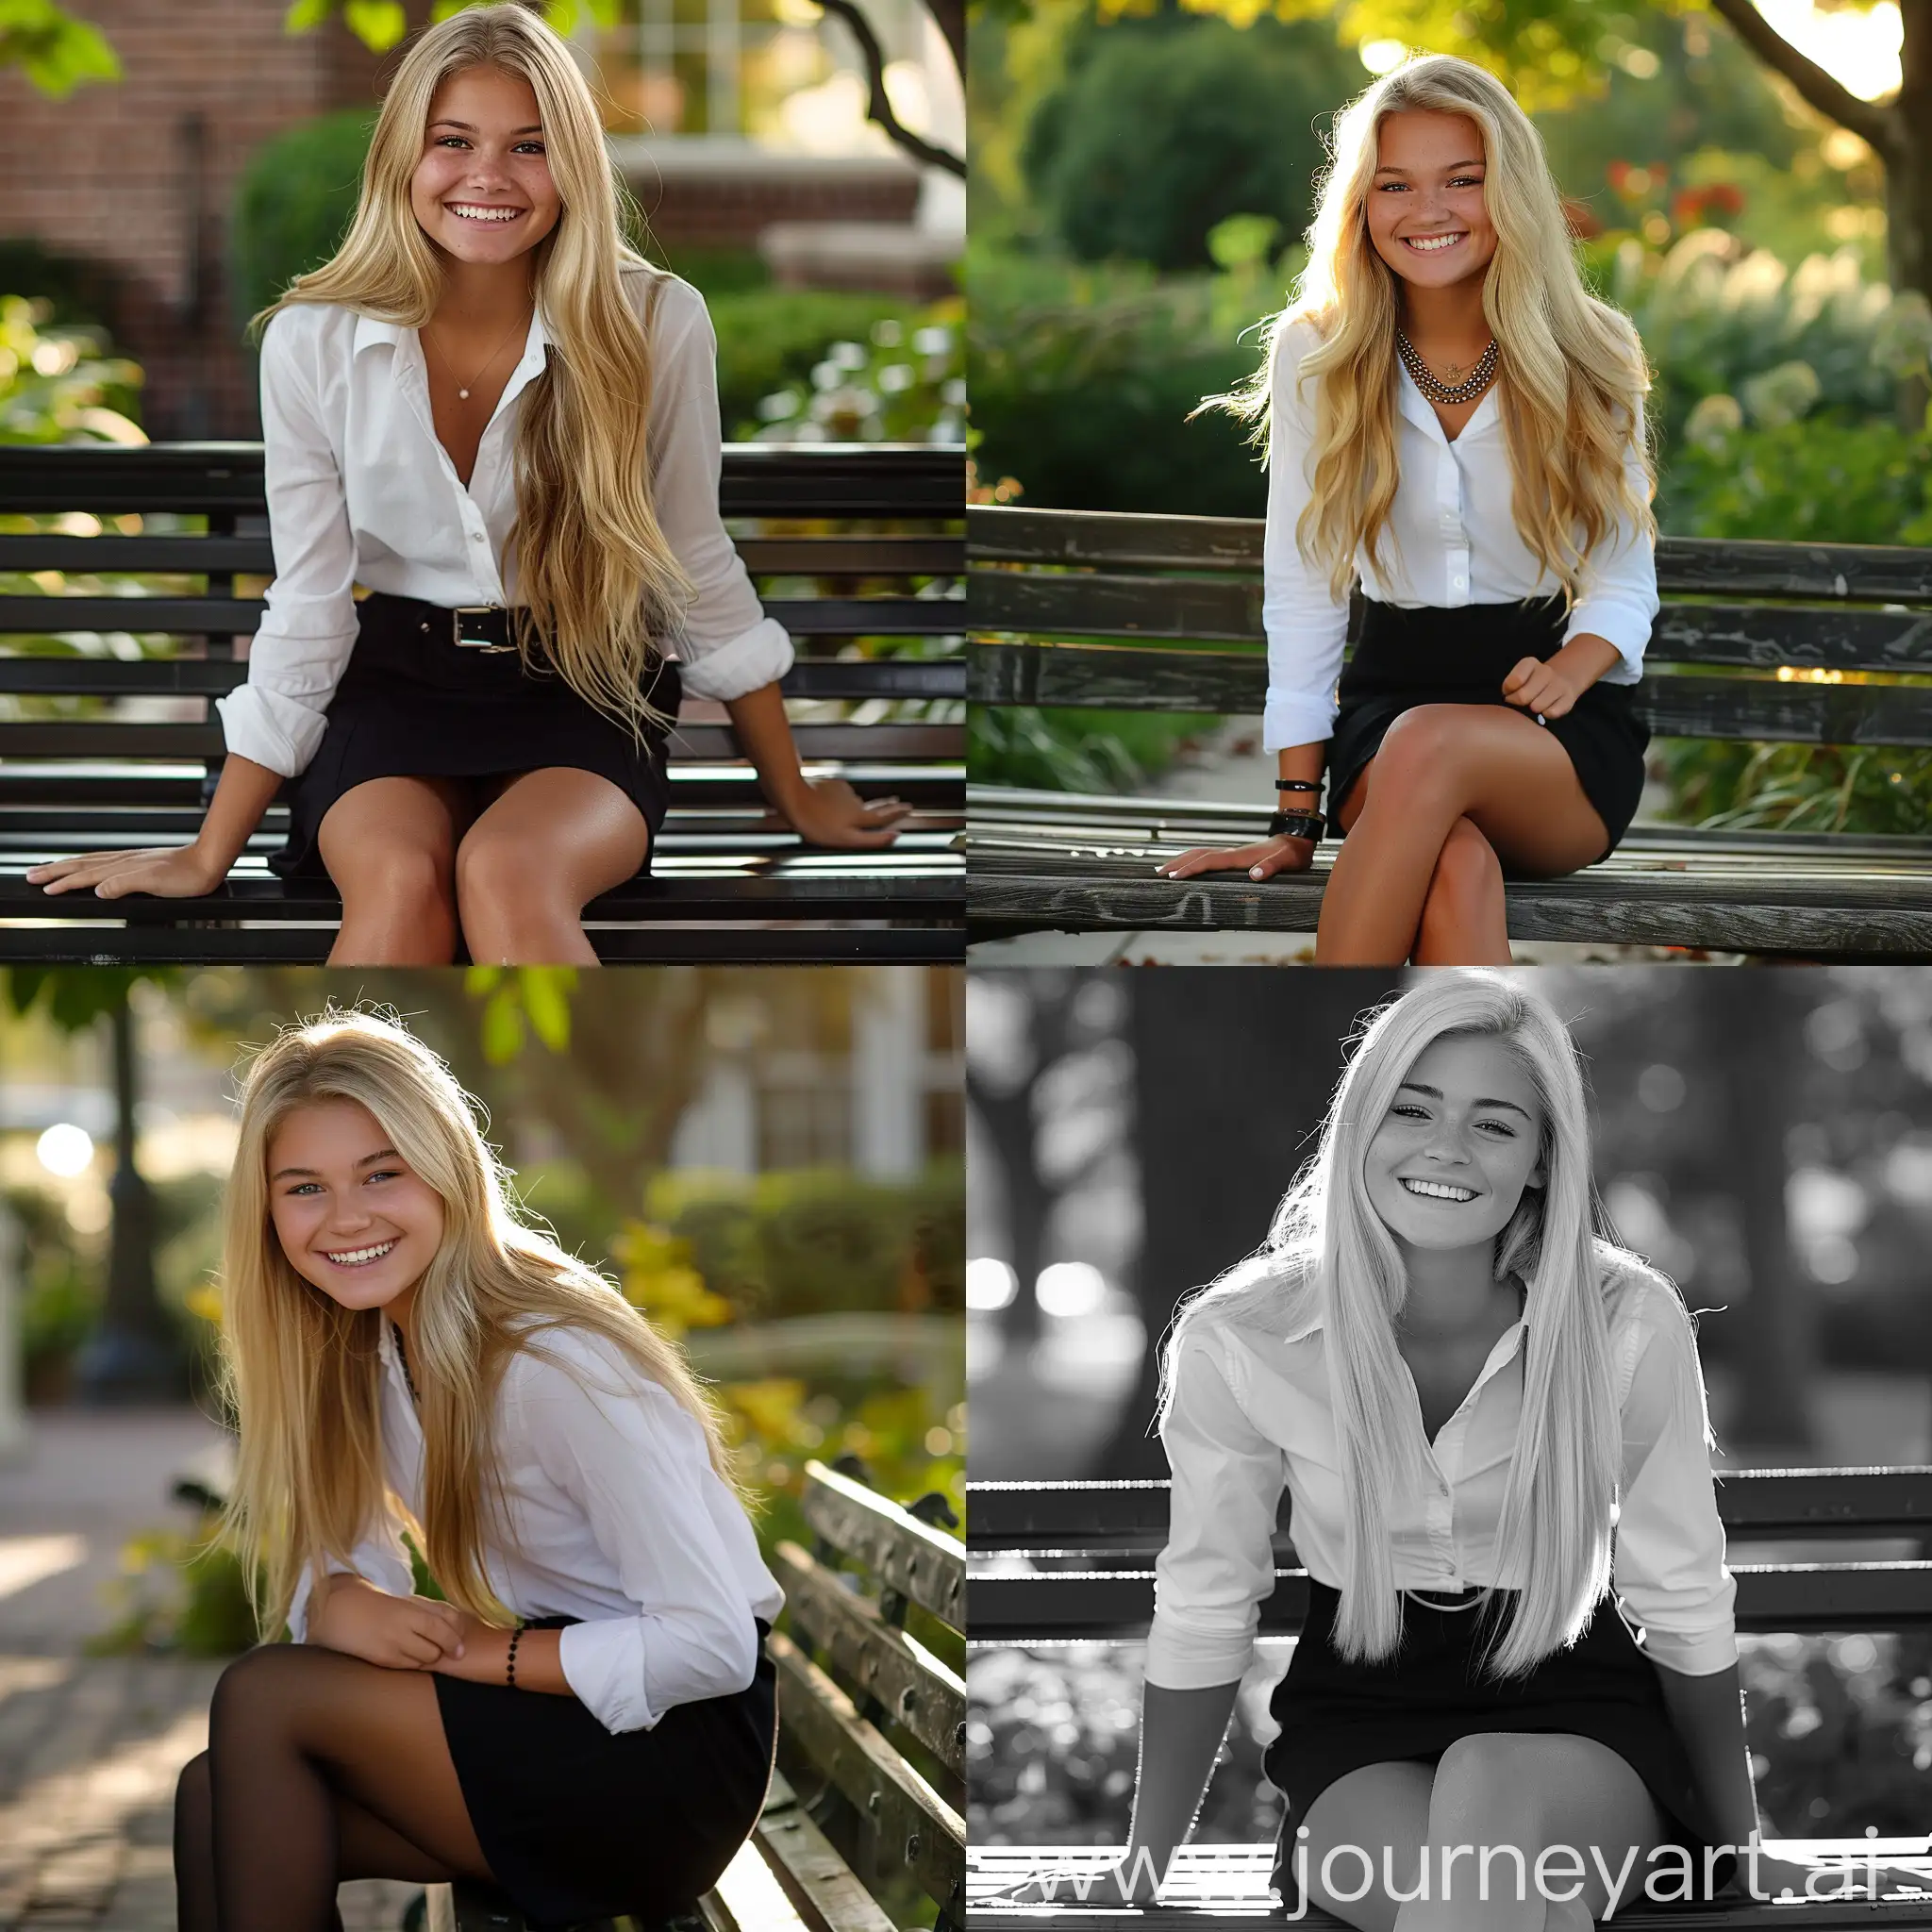 Cheerful-Blonde-Woman-in-Stylish-Attire-Sitting-on-a-Bench